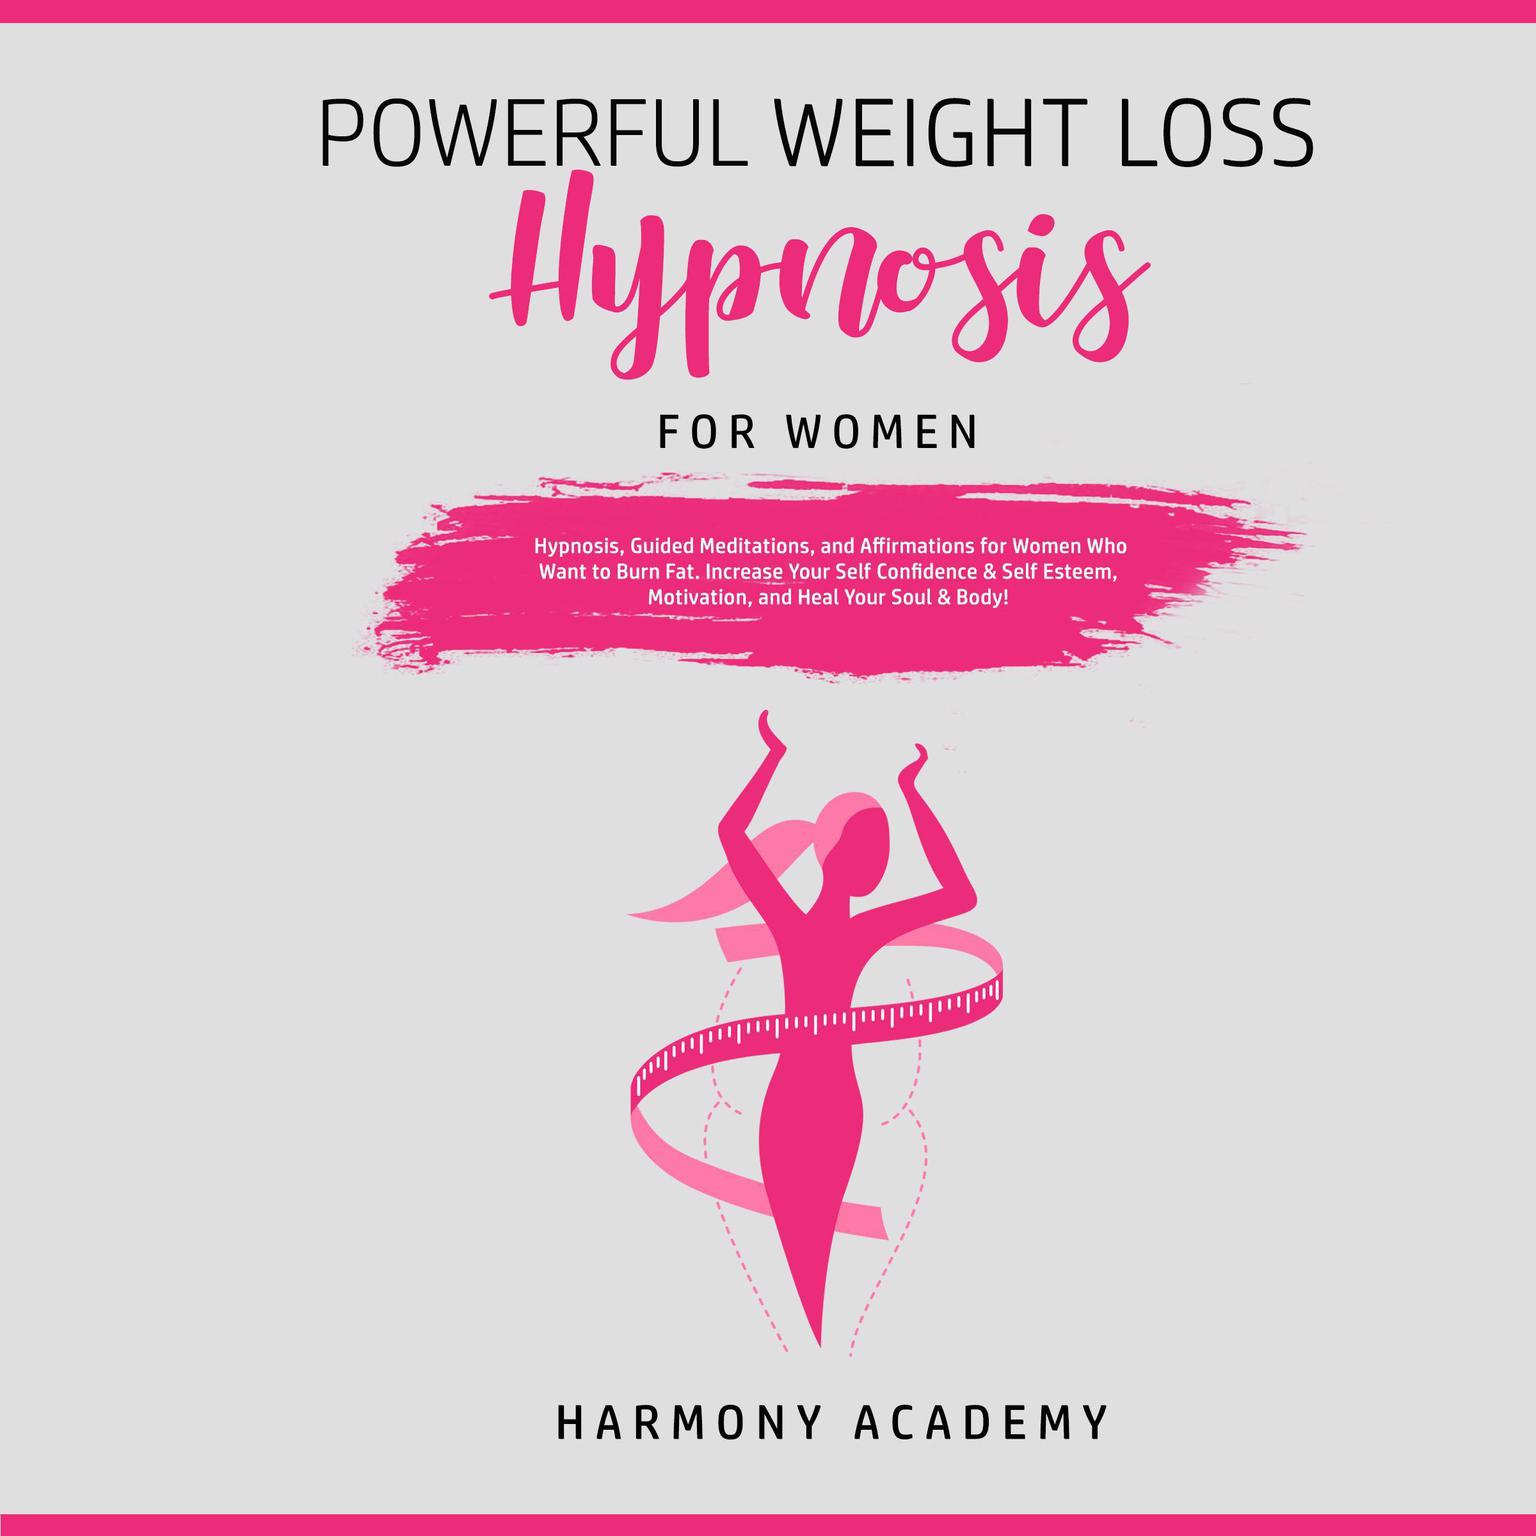 Powerful Weight Loss Hypnosis for Women: Hypnosis, Guided Meditations, and Affirmations for Women Who Want to Burn Fat. Increase Your Self Confidence & Self Esteem, Motivation, and Heal Your Soul & Body! Audiobook, by Harmony Academy